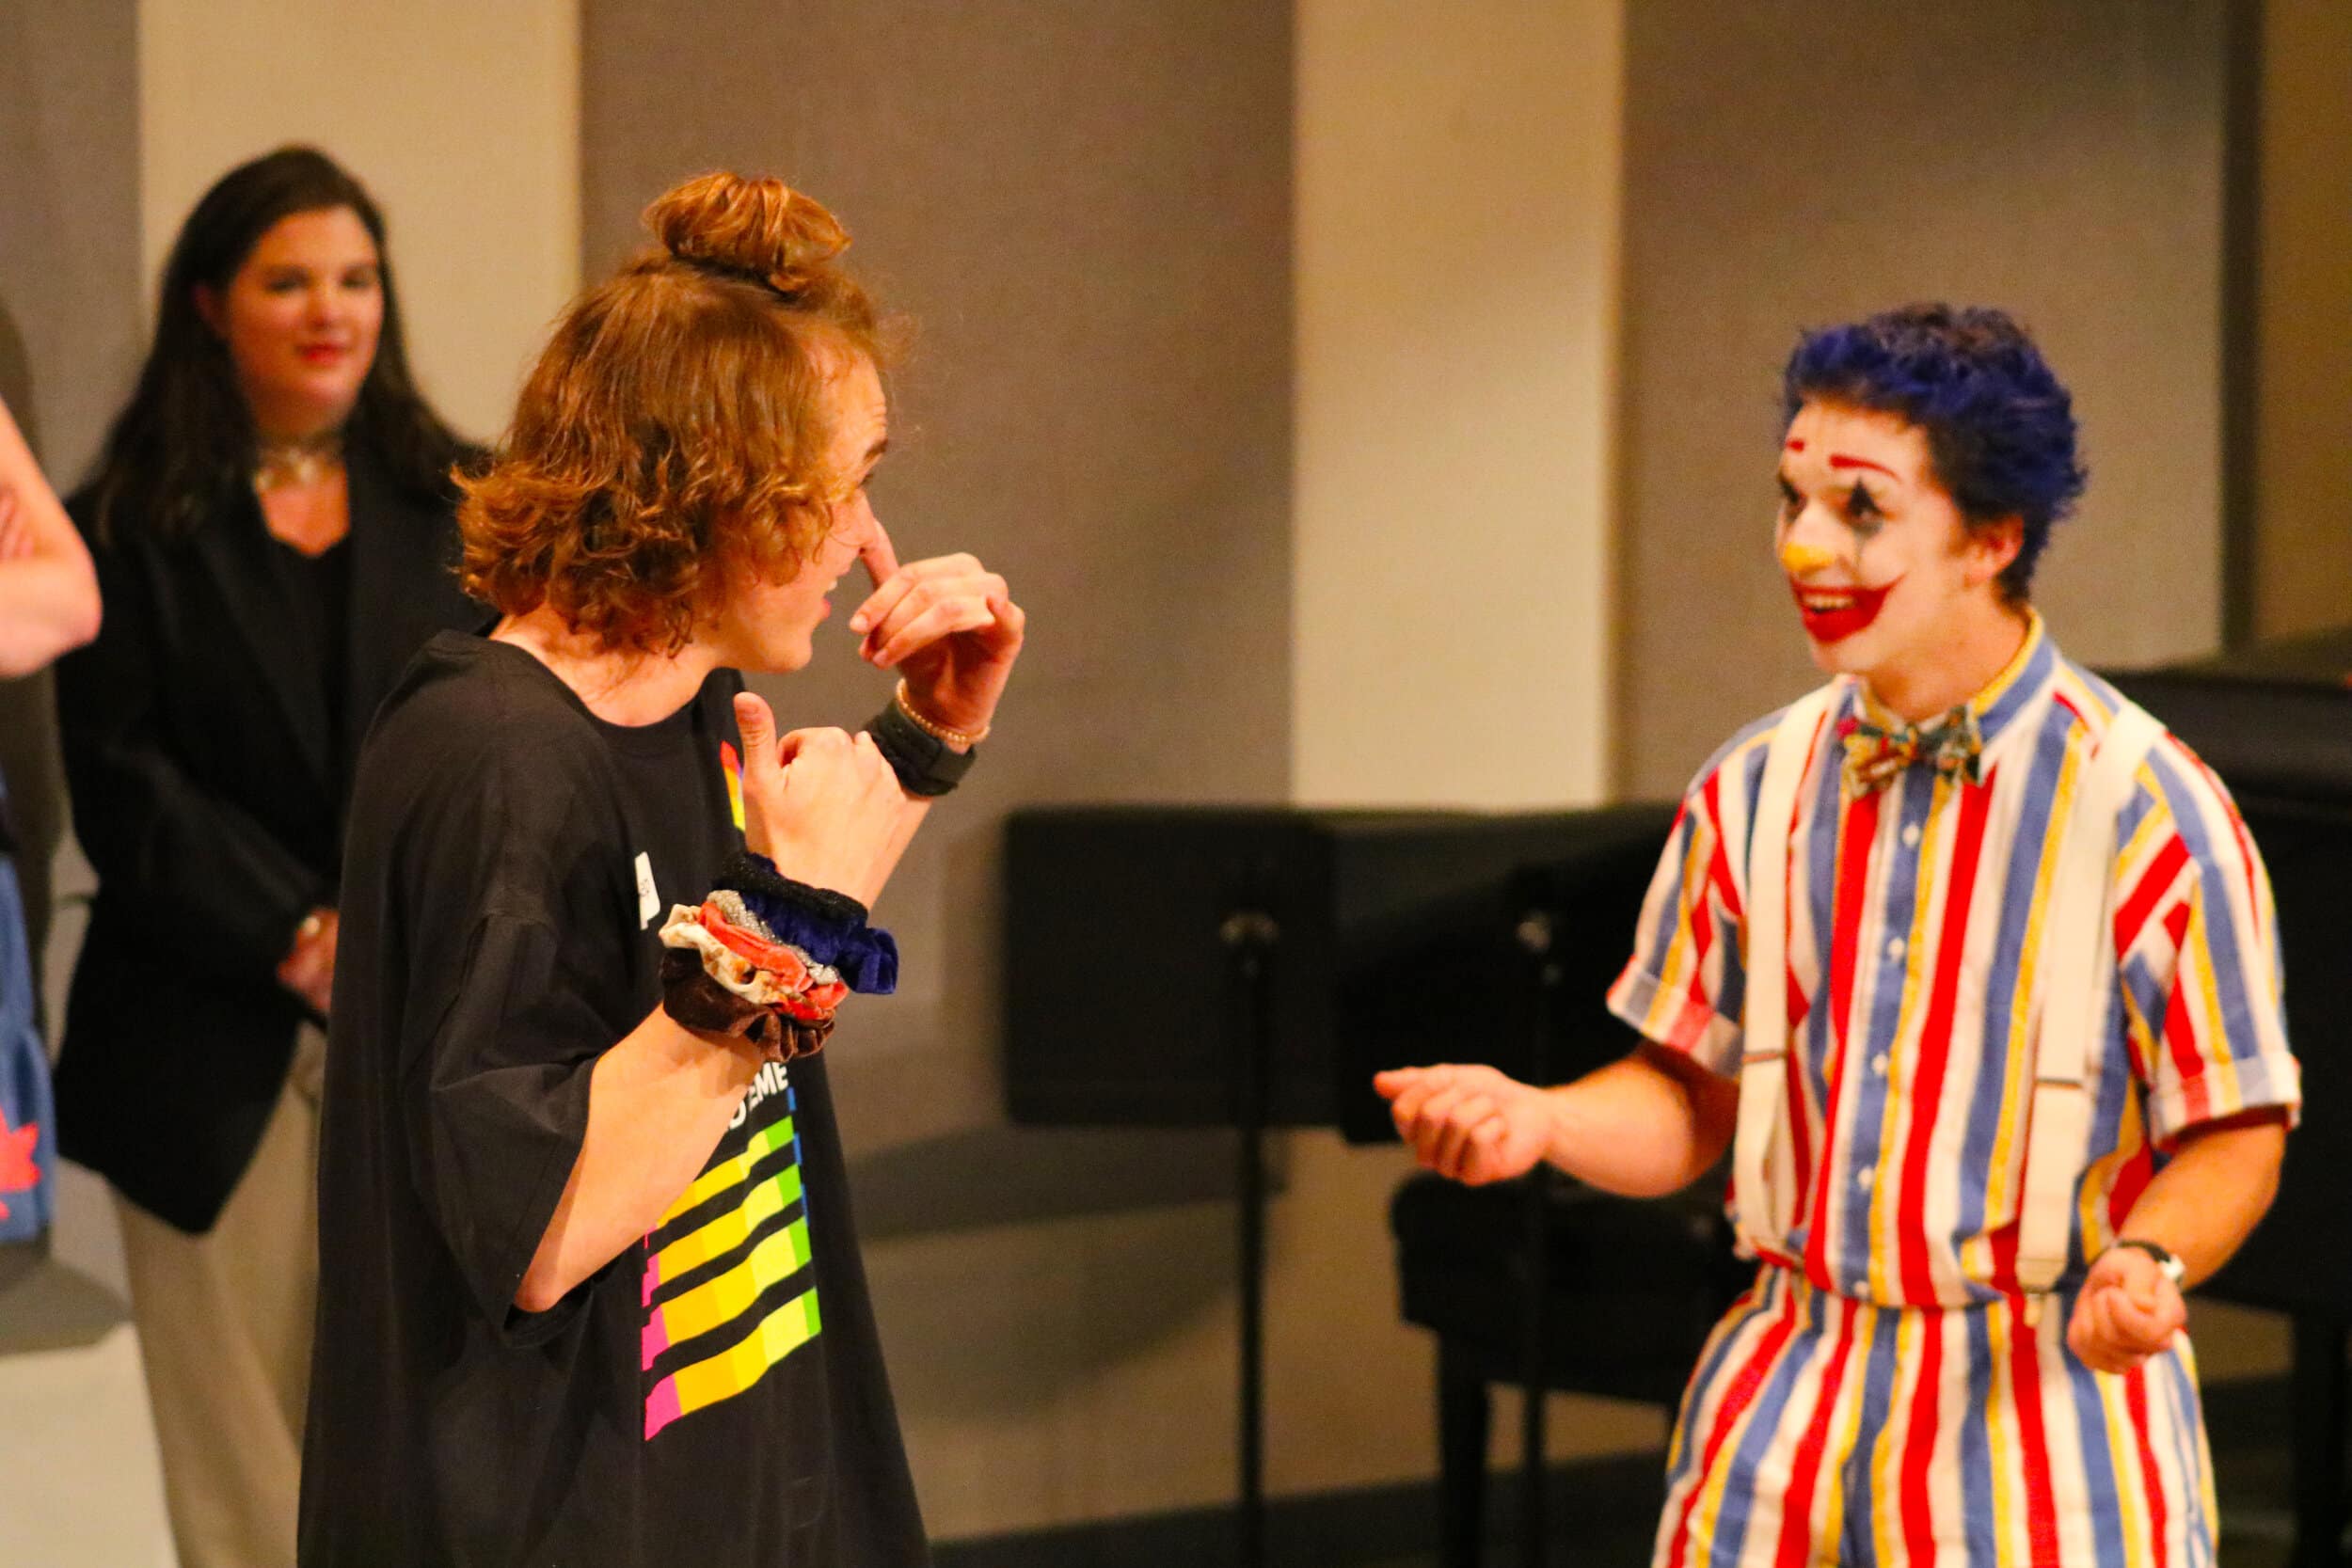 Junior Jonathon Reece and King perform in their first show as part of the Required Chaos team, Reece as a VSCO girl and King as a clown.